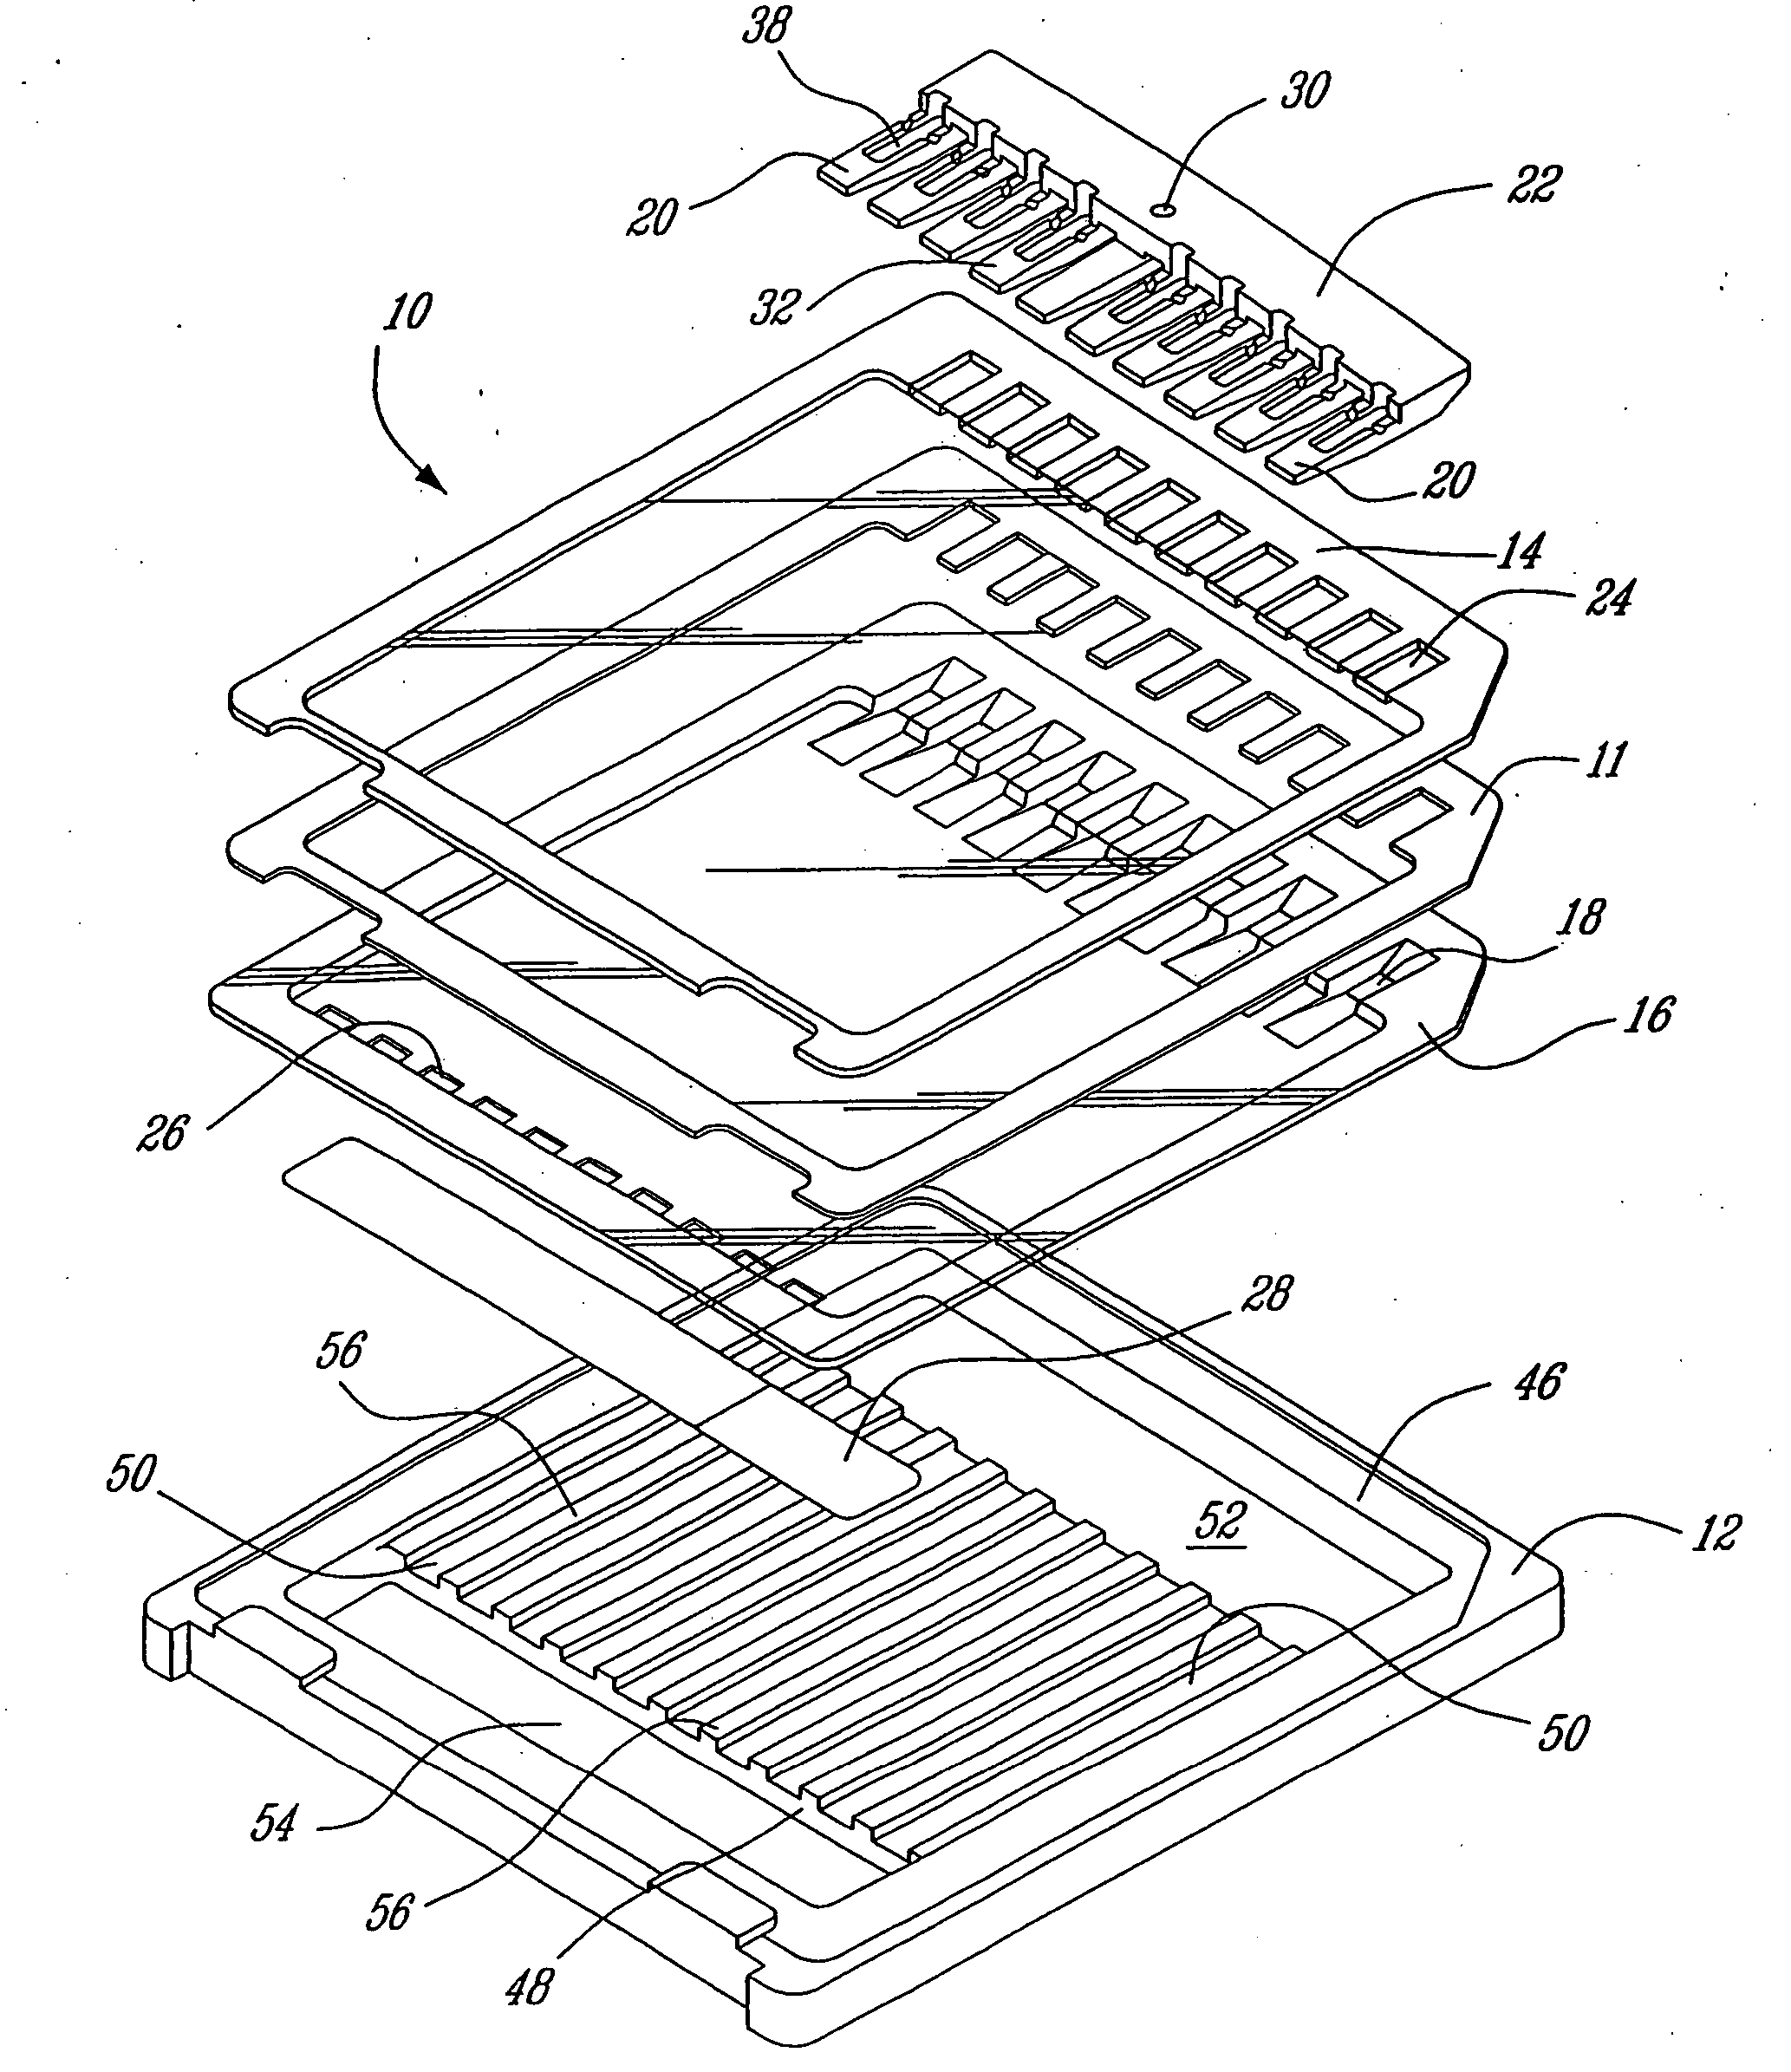 Apparatus for the manufacture of a disposable electrophoresis cassette and method thereof